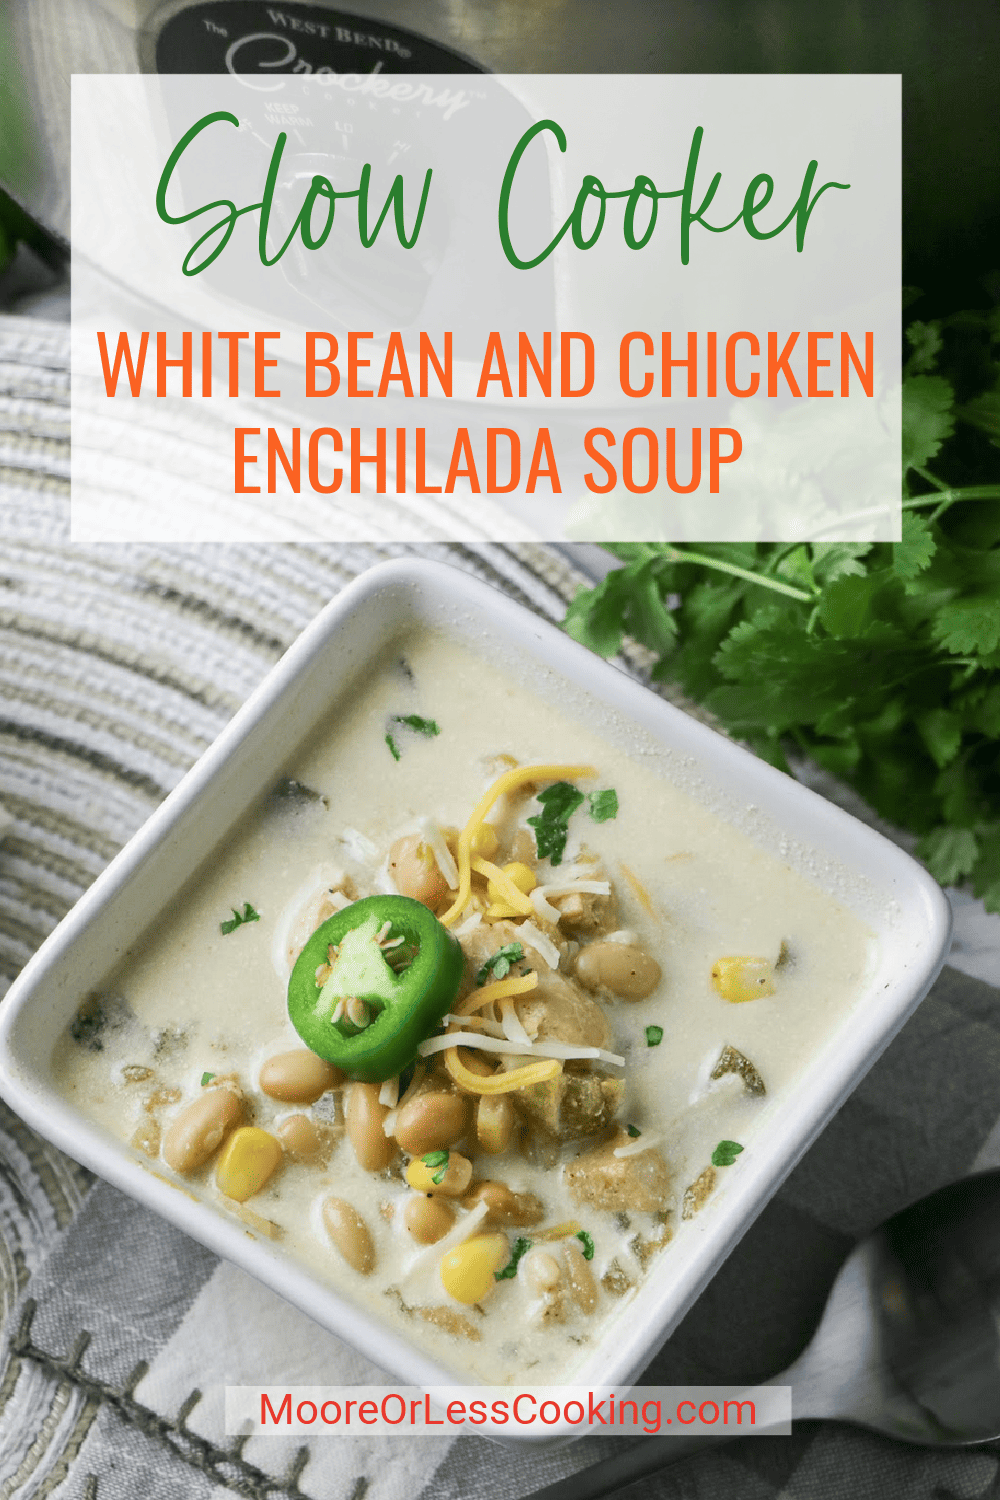 Creamy, hearty, and comforting, this Slow Cooker White Bean and Chicken Enchilada Soup is loaded with green chiles, beans, spices, and chunks of chicken. It's a set-it-and-forget-it meal, thanks to your slow cooker! via @Mooreorlesscook